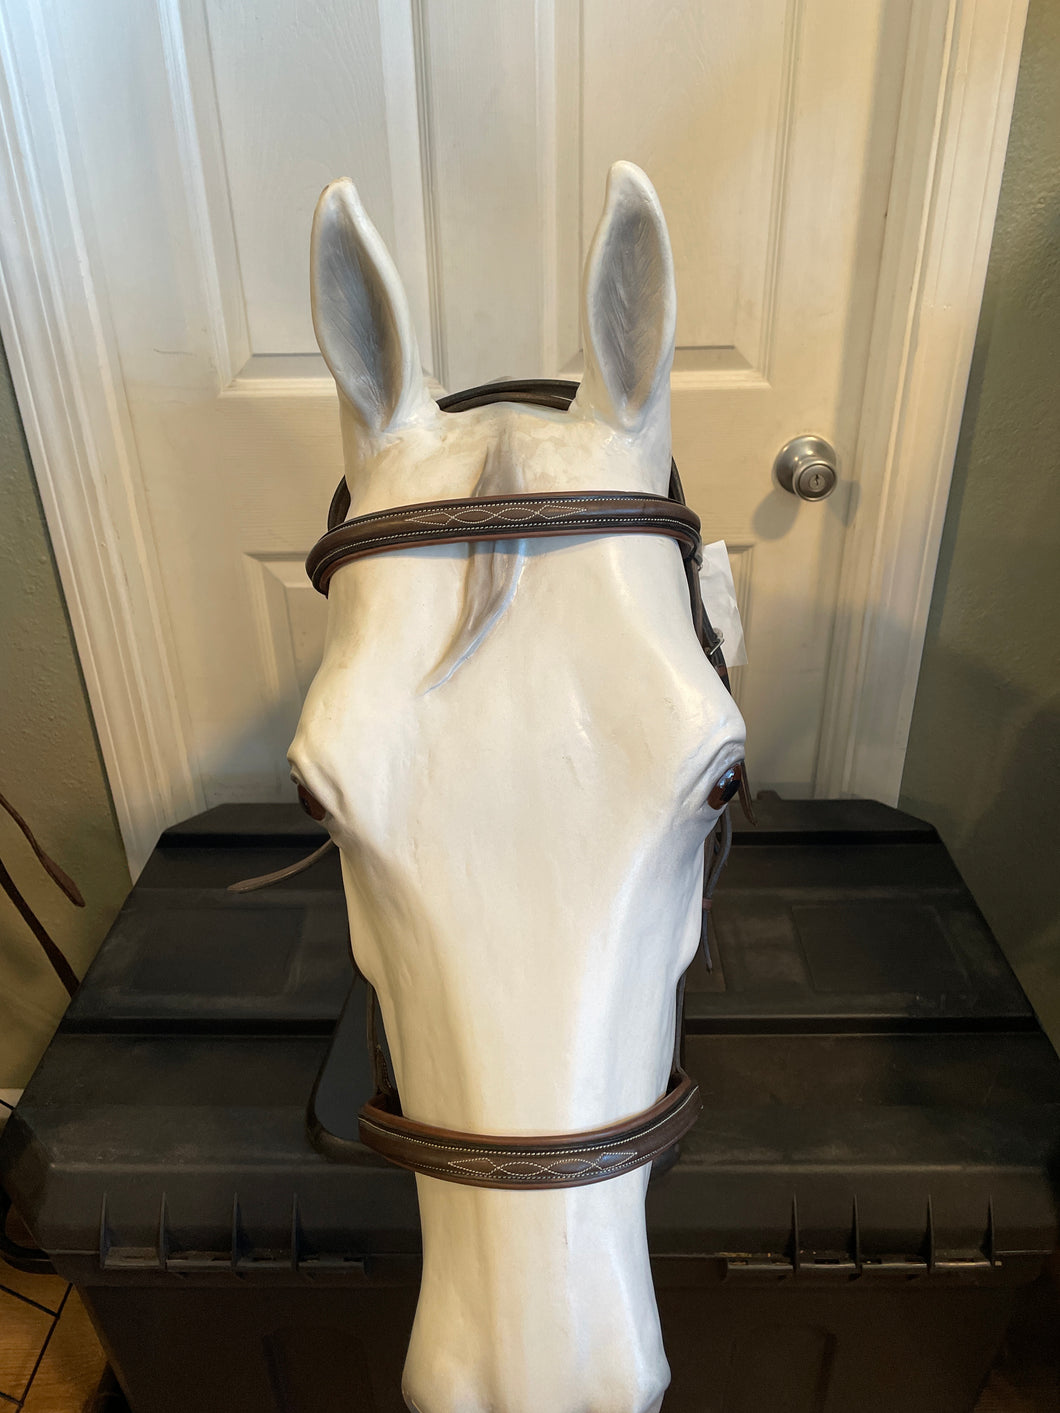 English Bridle With Laced Reins